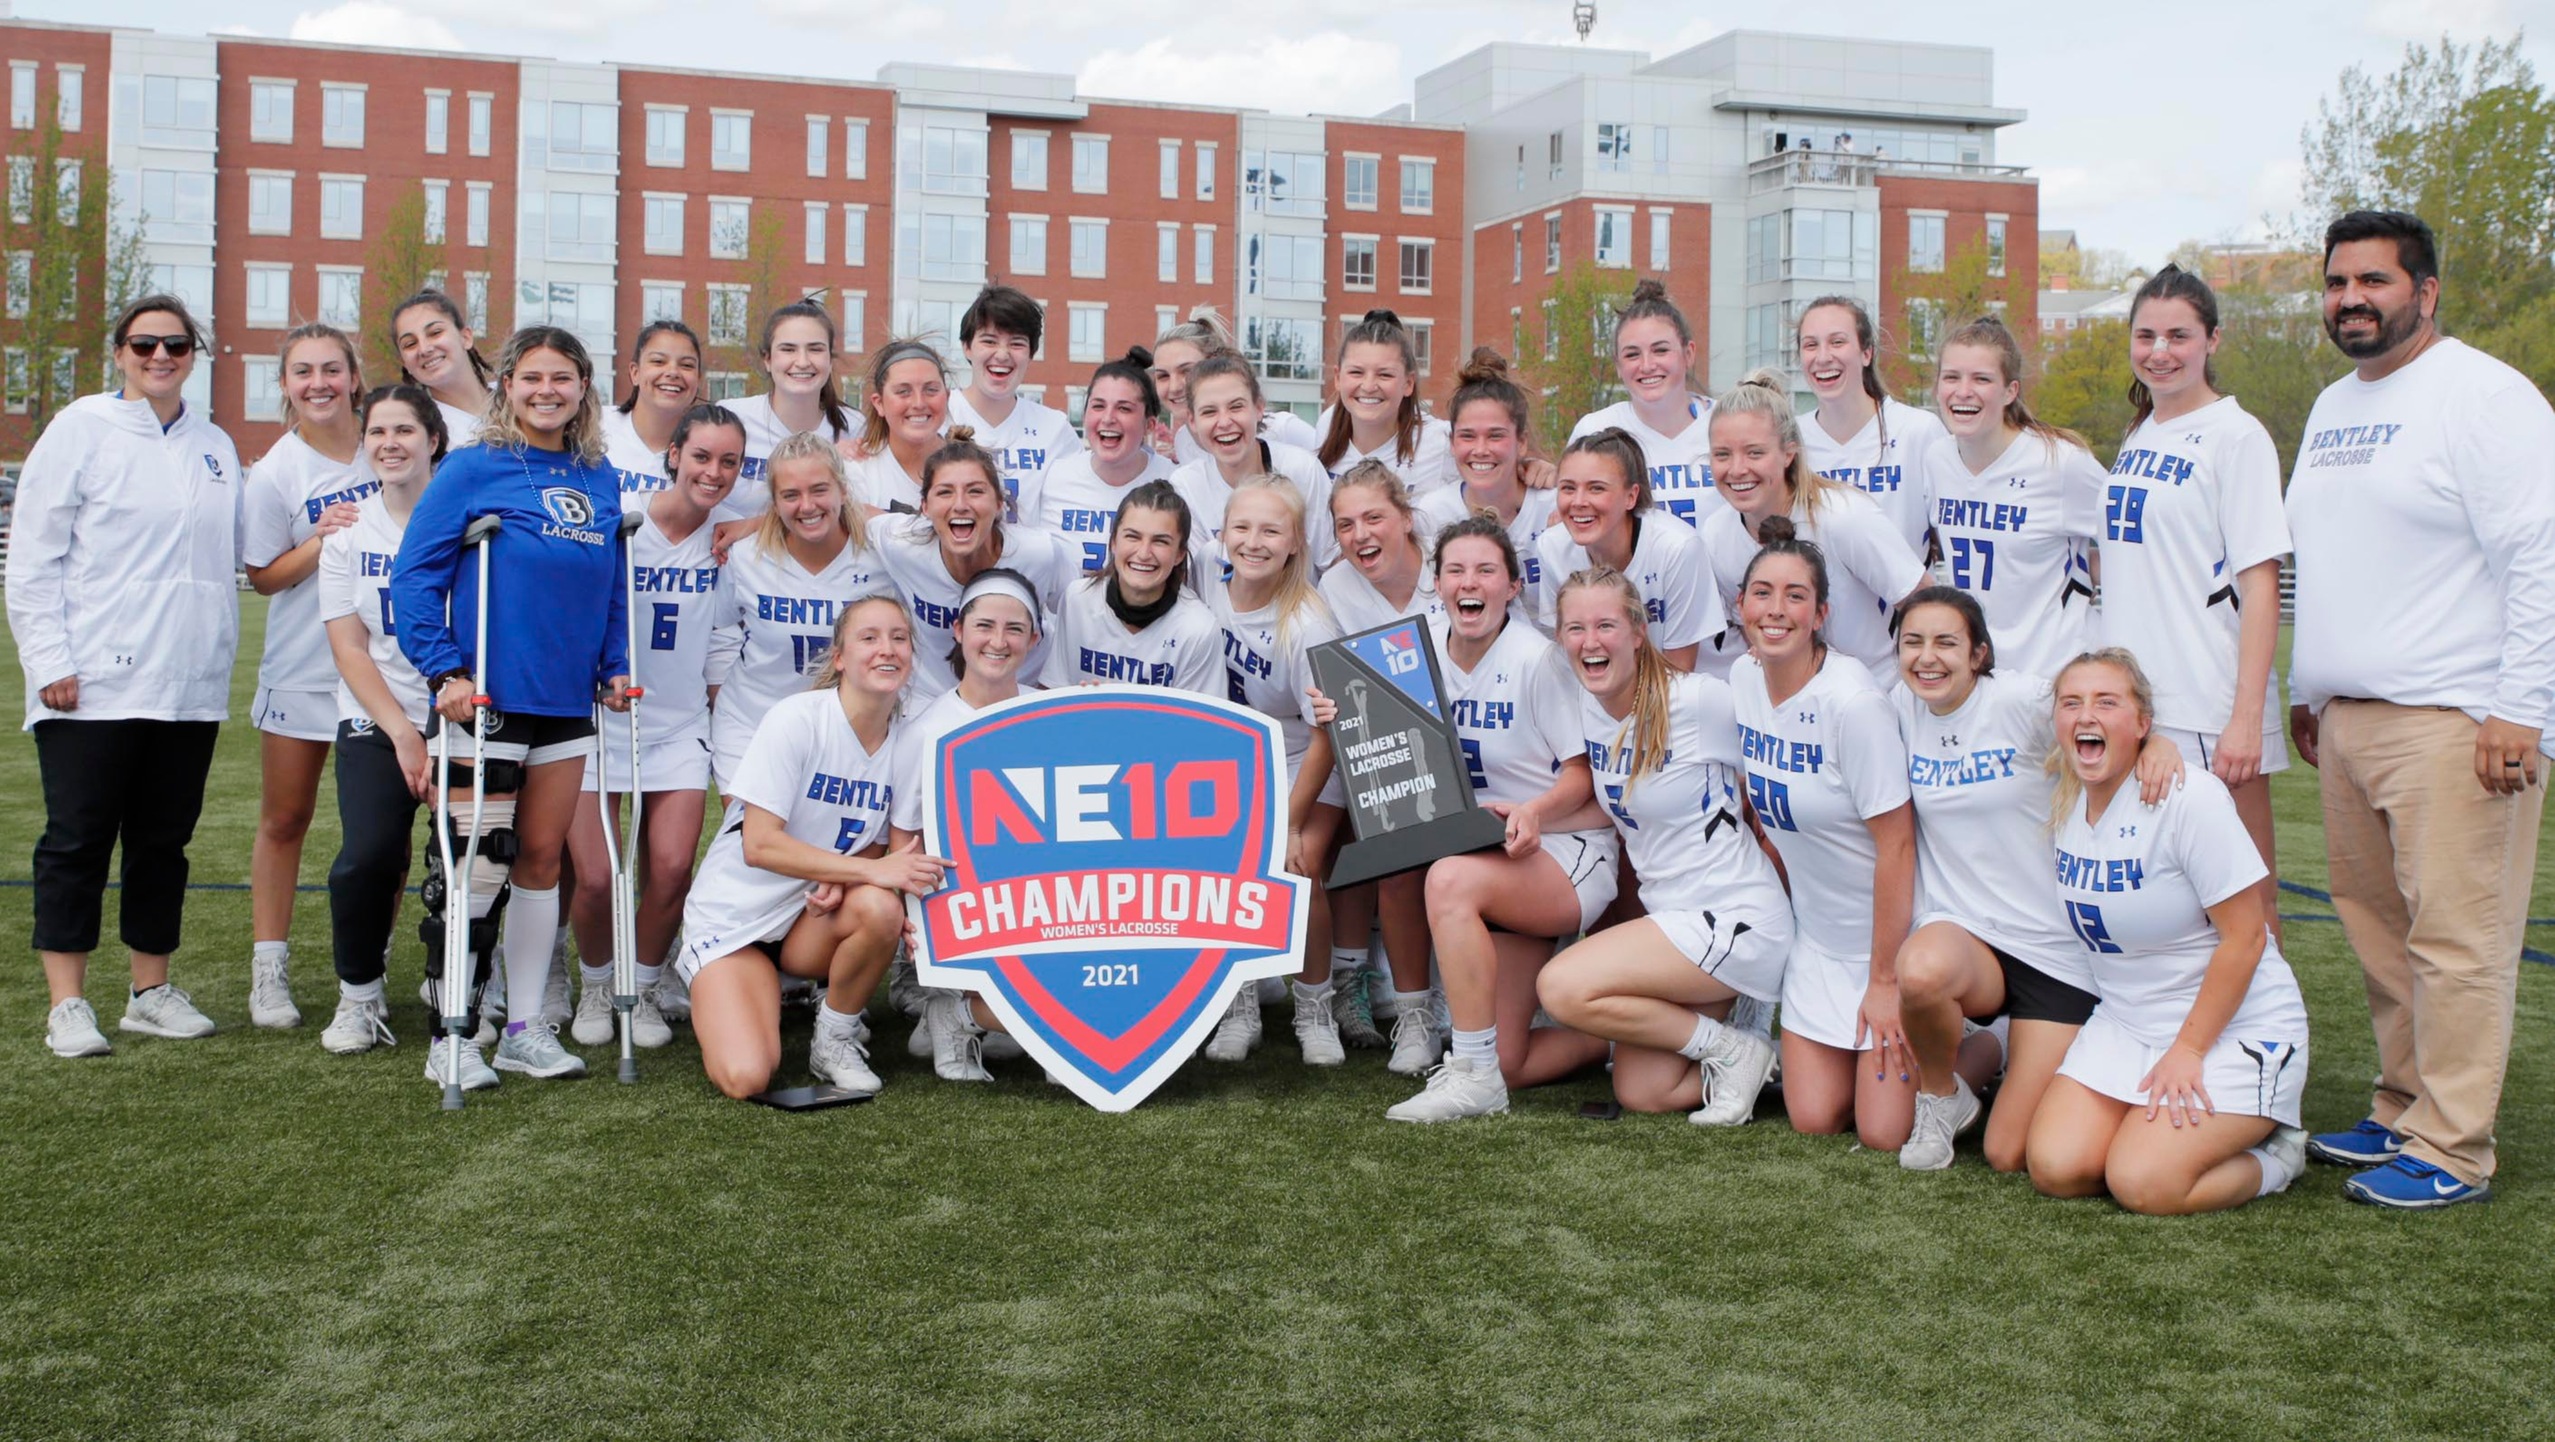 NE10 Champs! Bentley Claims NE10 Conference Title with 9-8 Victory over Adelphi